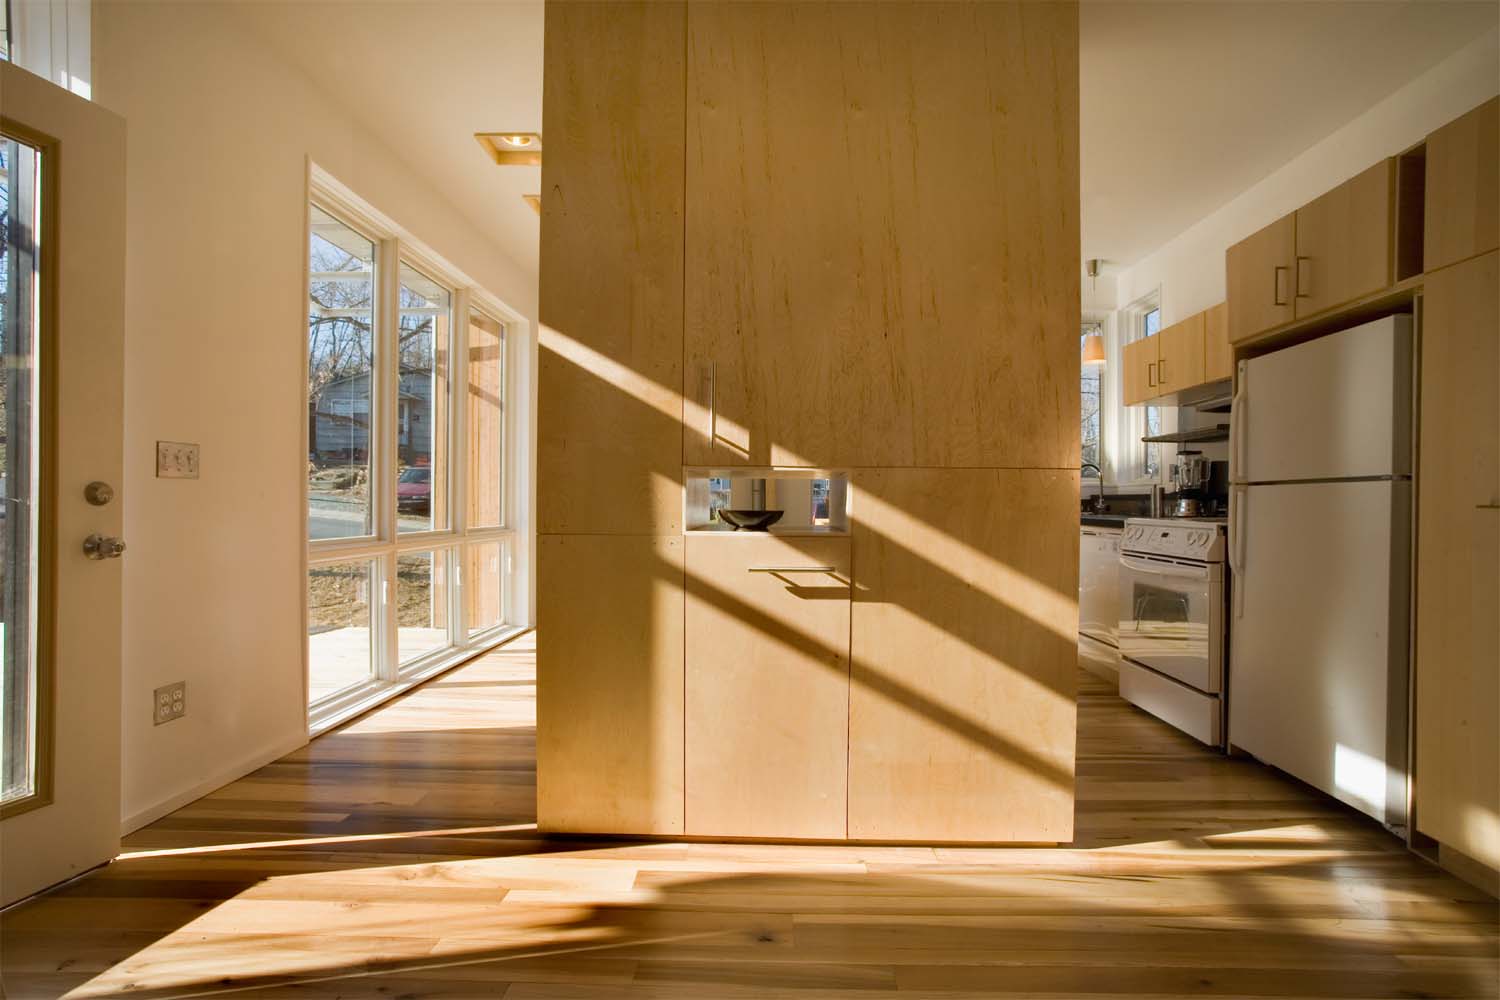 Interior of a home from the ecoMOD project